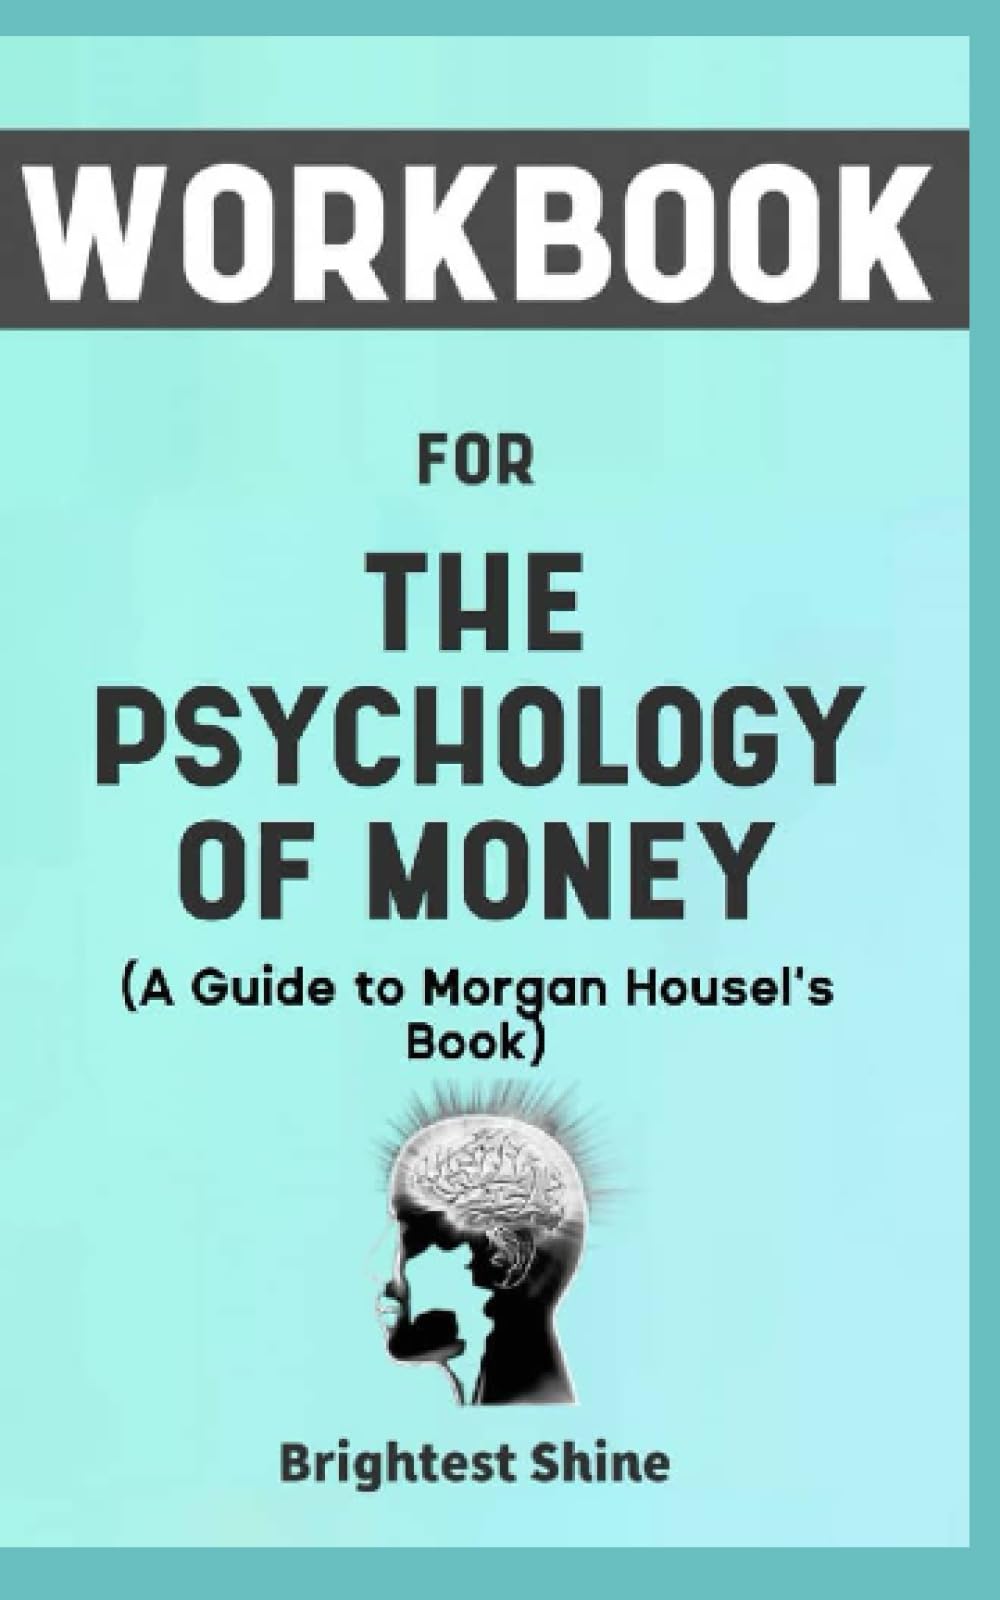 The Psychology Of Money By Morgan Housel (PaperBack Book) – ActiveMindset